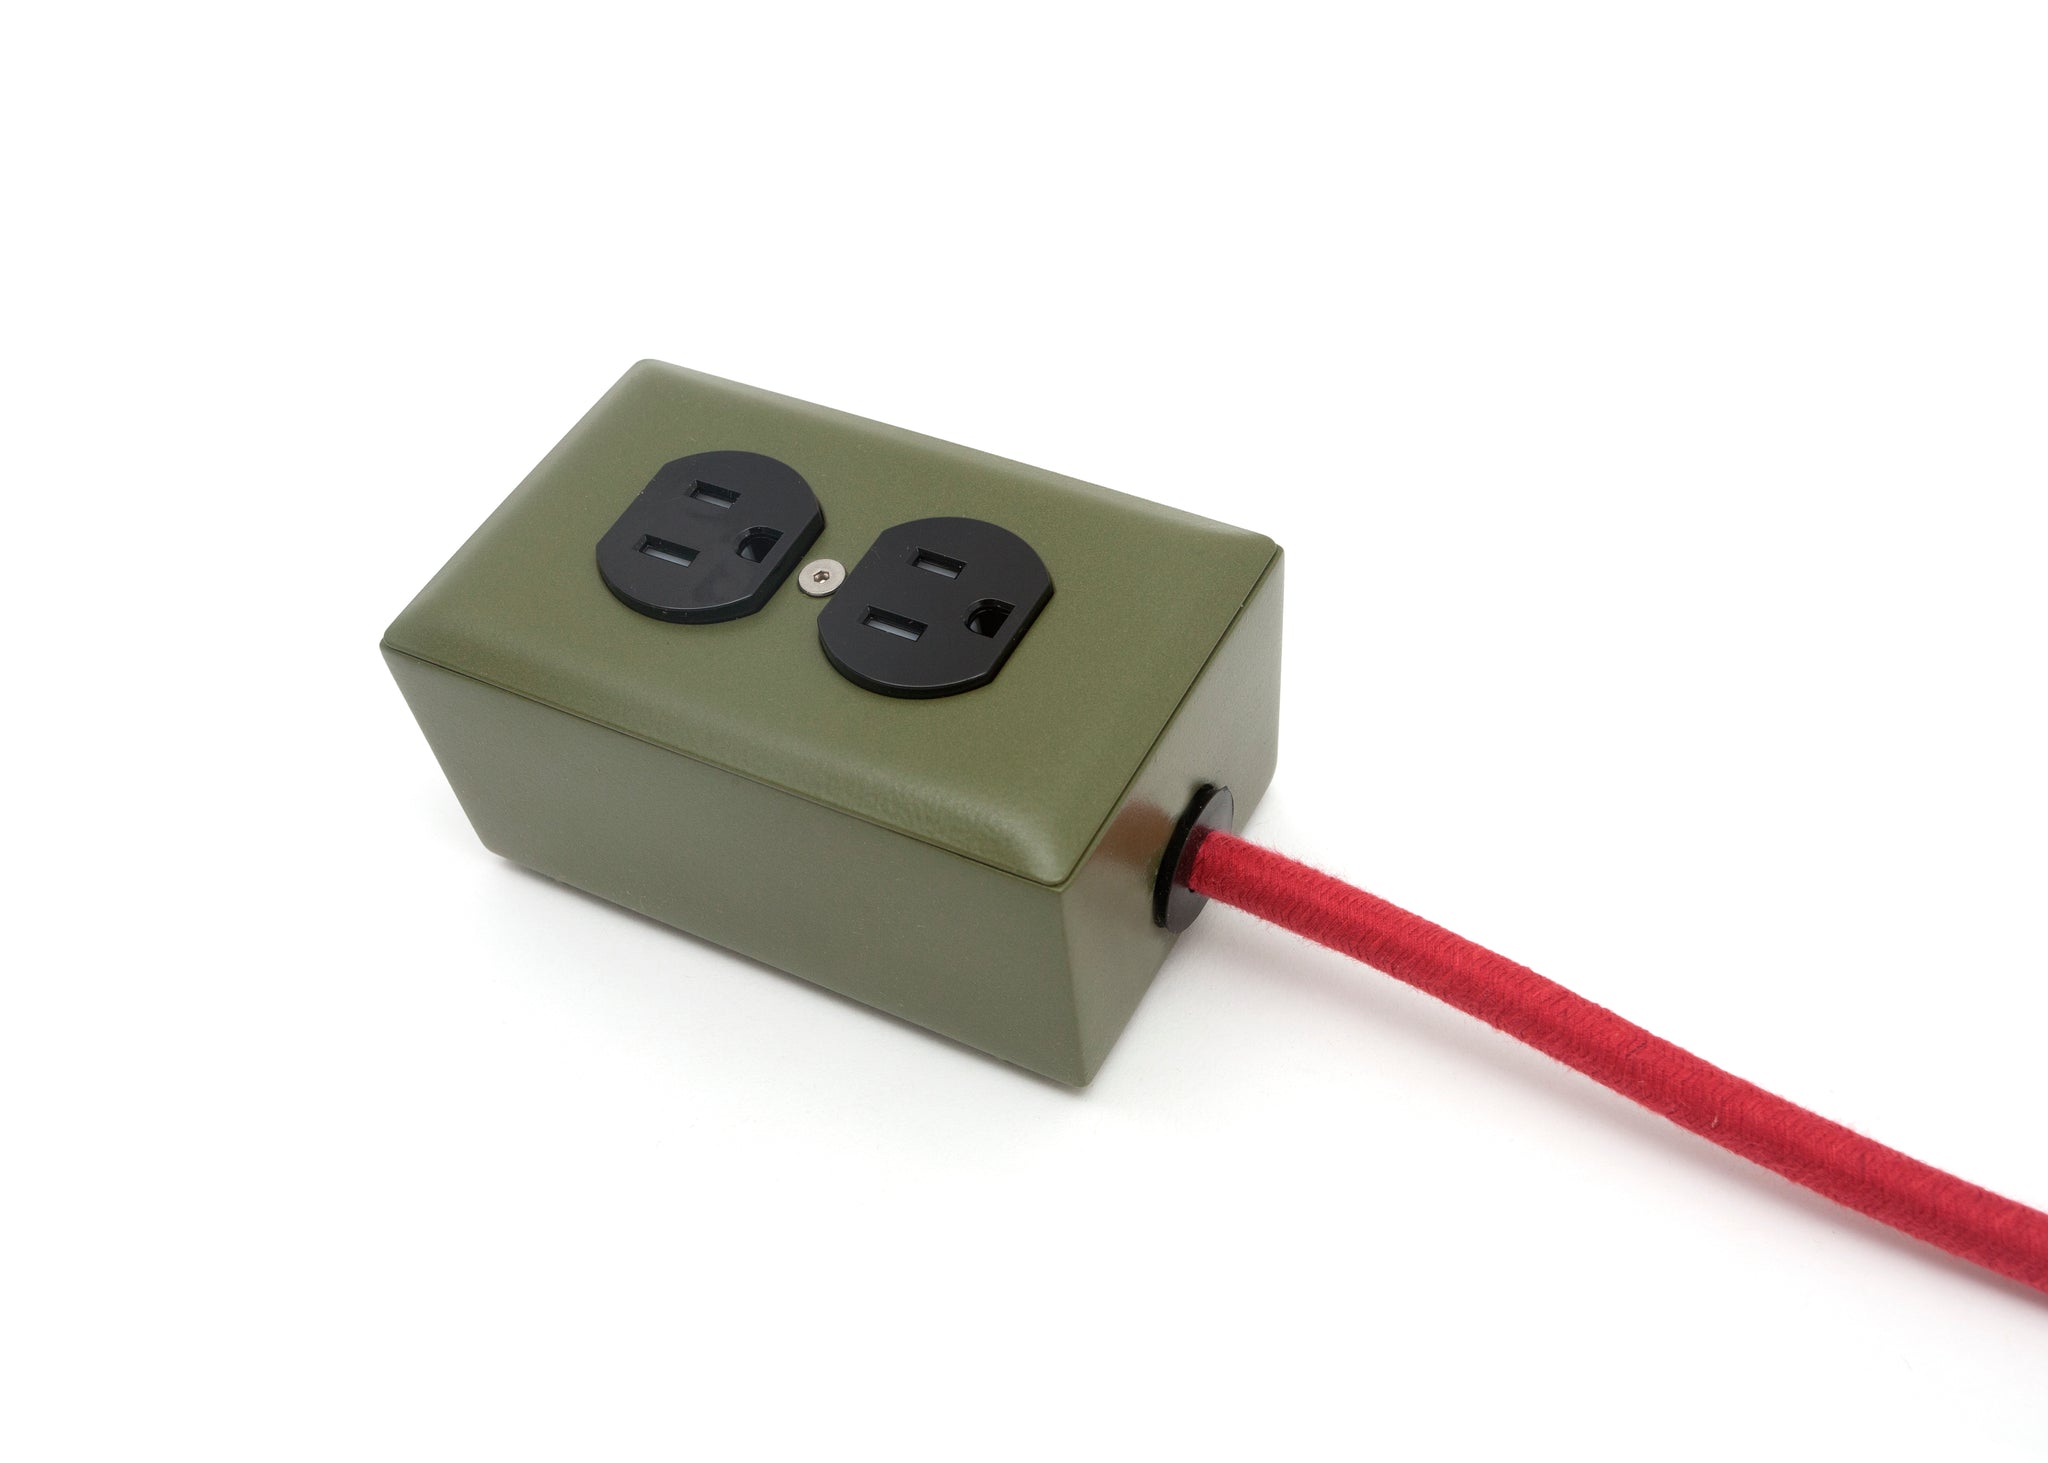 Extō 4077th Green - A Modern Dual-Tamper-Resistant Outlet, 15-AMP Extension Cord